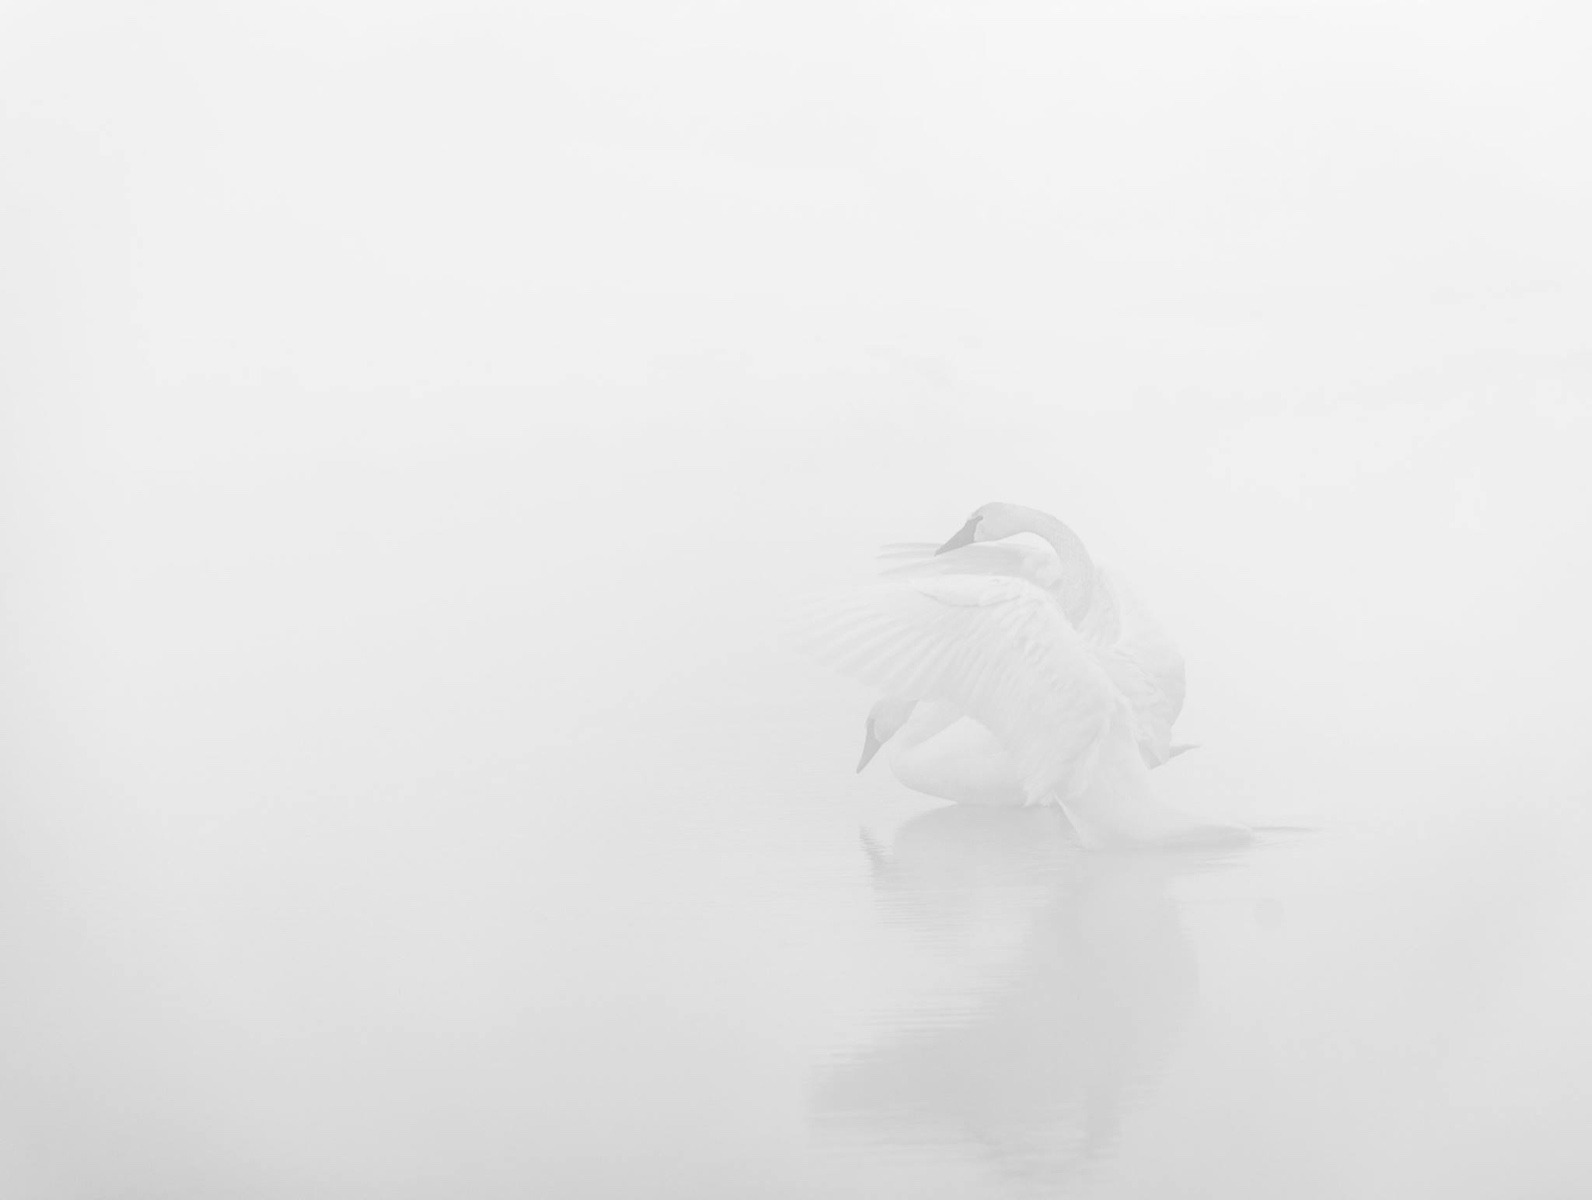 &quot;I Will Love You, Forever,&quot; a photograph of two trumpeter swans by David Brookover. The Greater Yellowstone Ecosystem played a key conservation role in the rescue of these elegant birds from oblivion. An image that epitomizes the Zen notion of less being more and less detailed color fields (in photography, as in painting) setting moods, it reminds us how Brookover shines as a fine artist illuminating the natural world. He also is known for his dramatic ski photography. He makes his home in Victor, Idaho and has a gallery in Jackson, Wyoming. For more information on his work go to www.brookovergallery.com